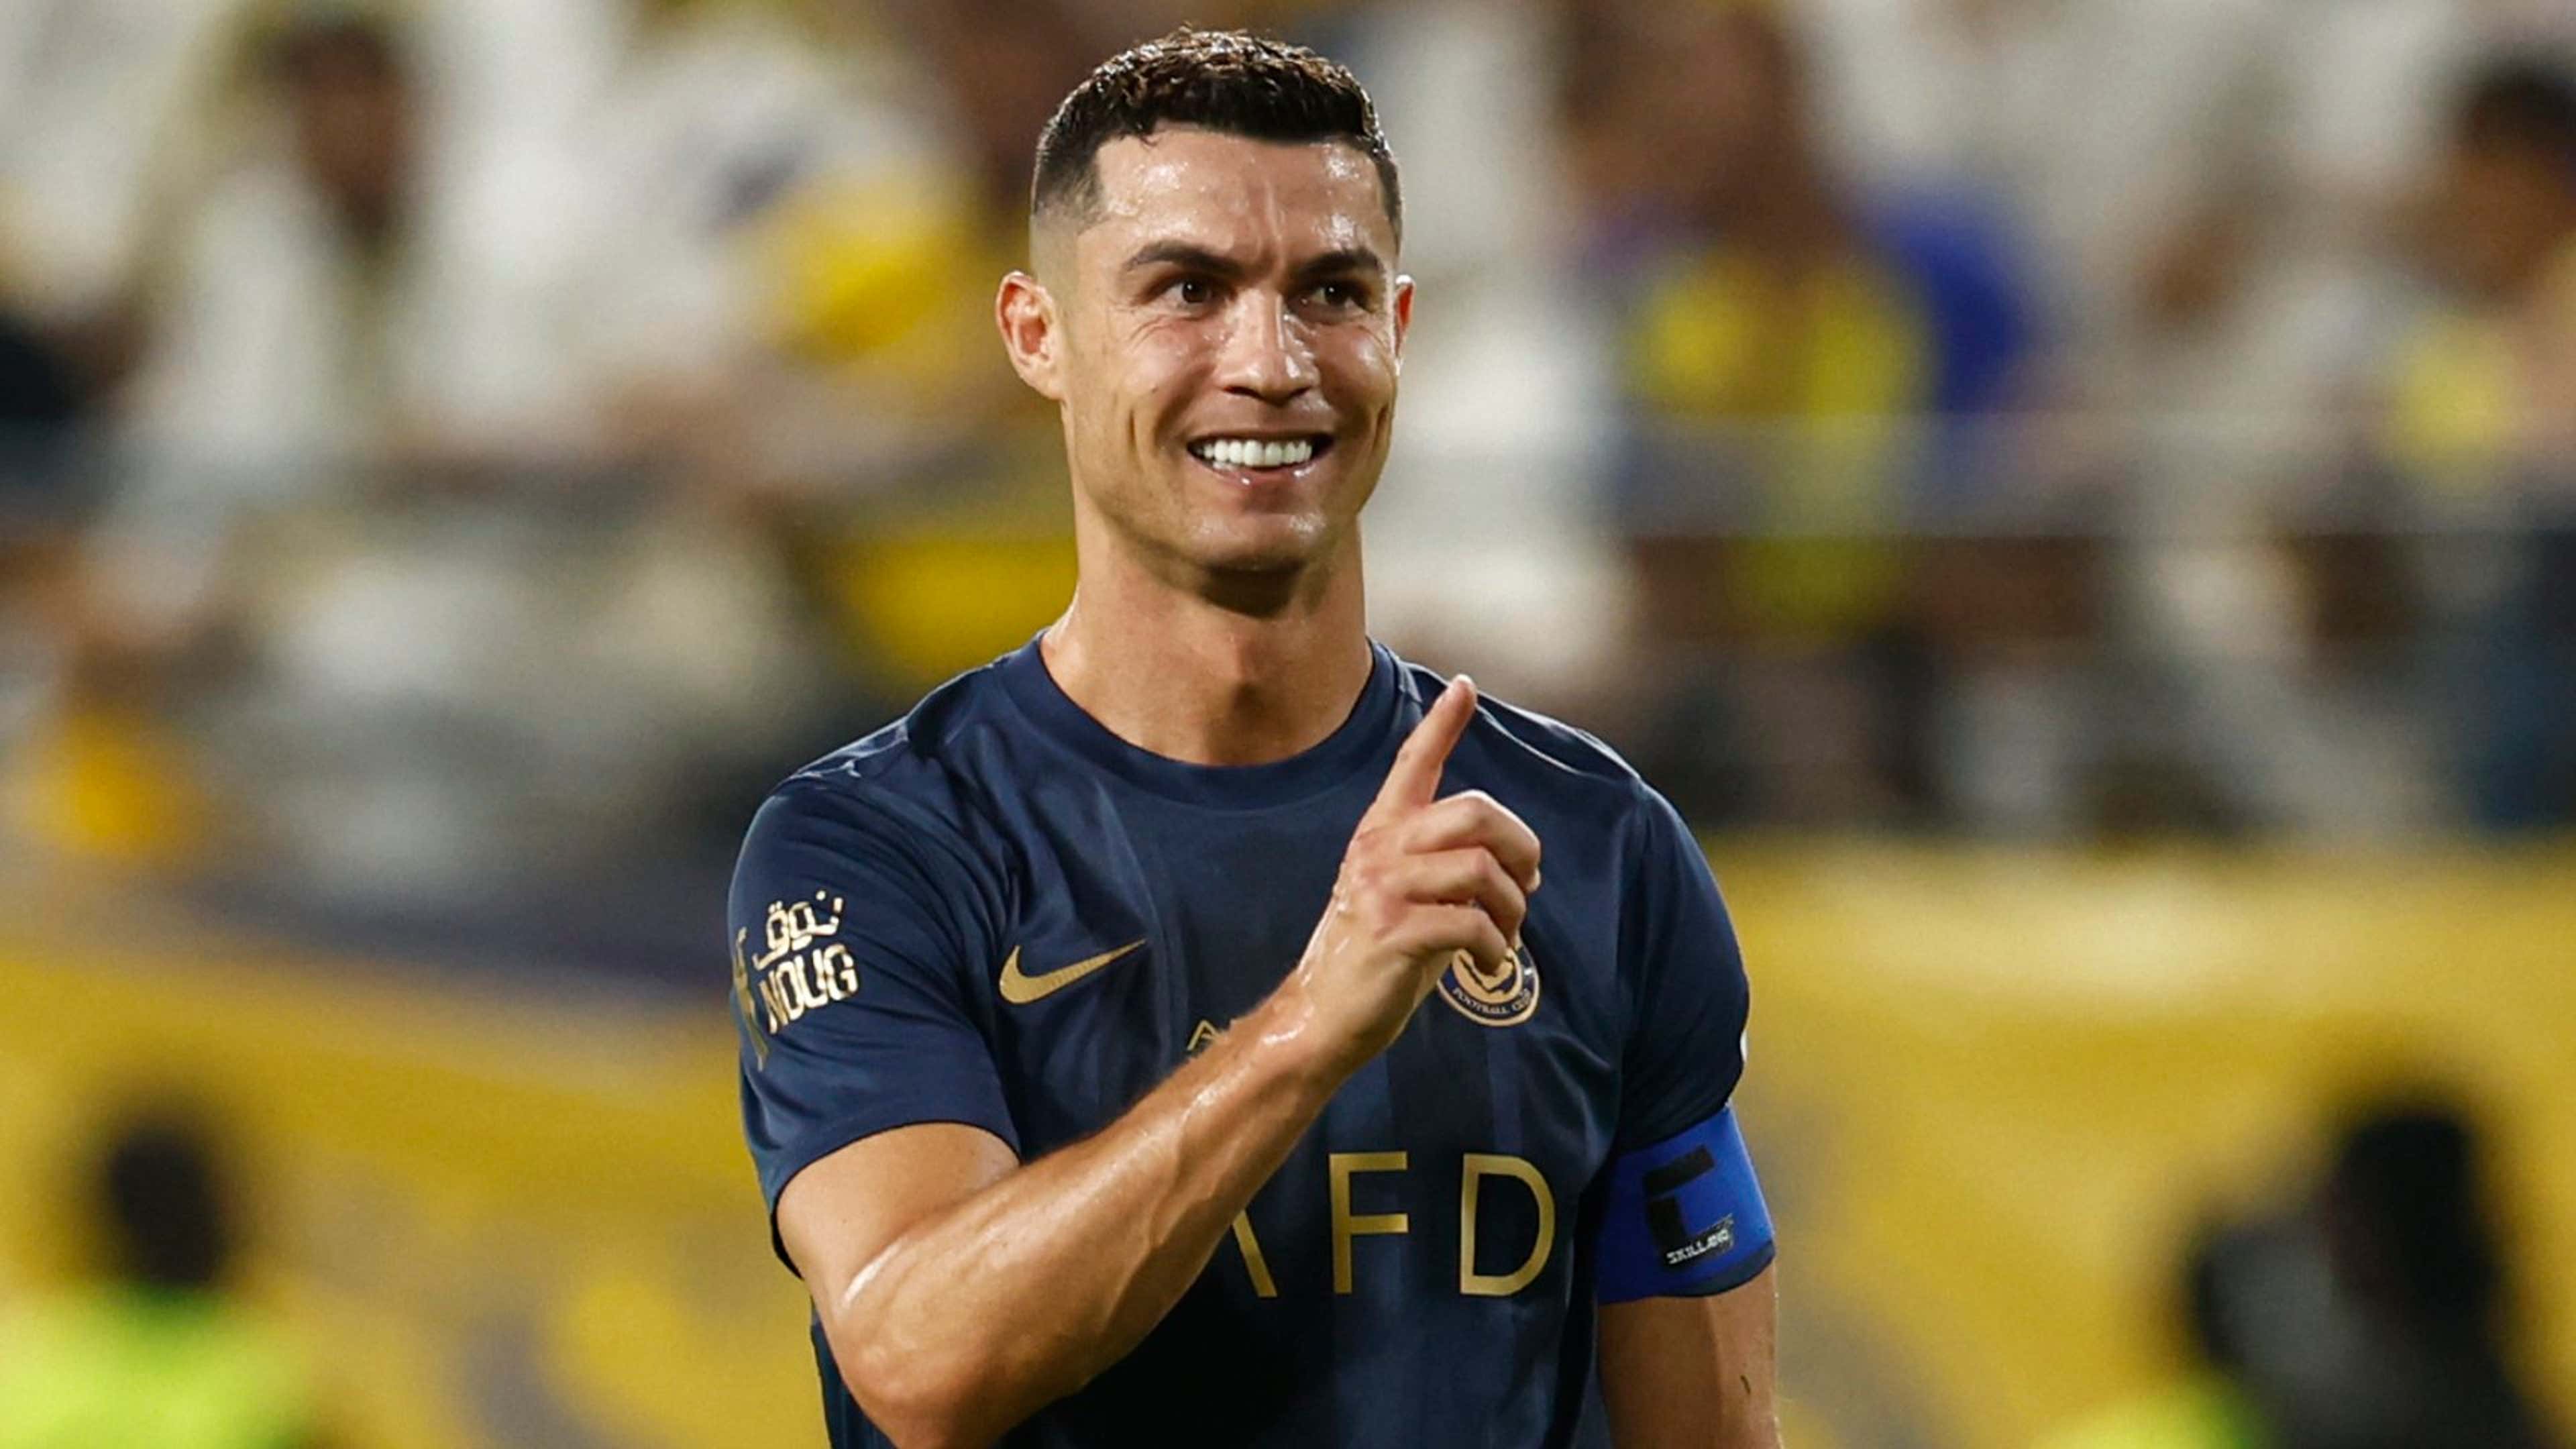 Lionel Messi PSG: 'I always thought that Messi was better than Cristiano  Ronaldo' : Al-Nassr teammate makes explosive remark